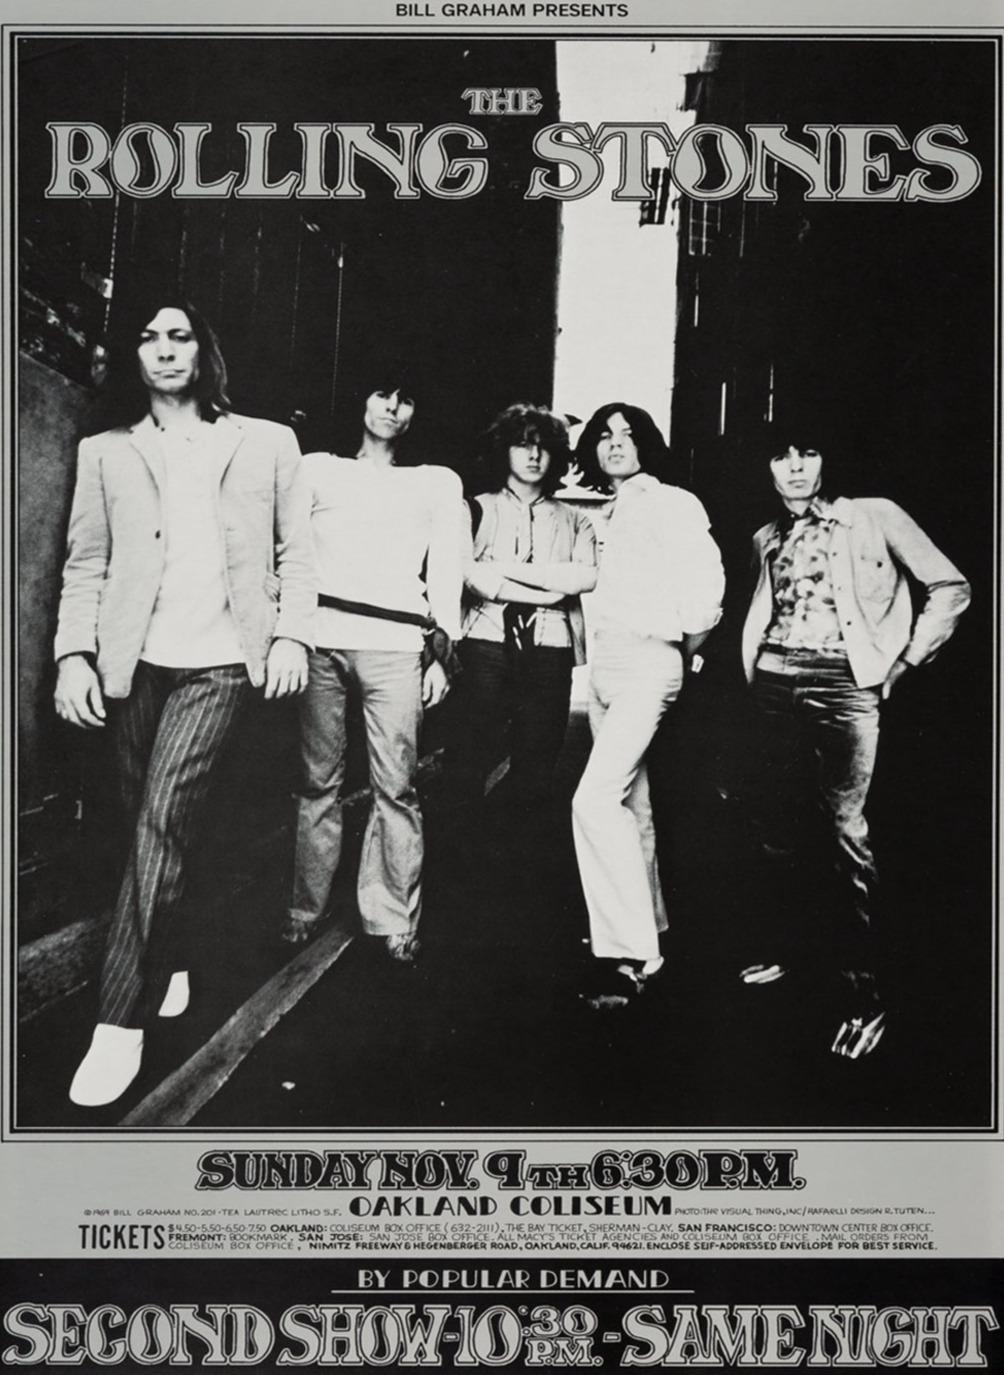 Wonderful poster from The Rolling Stones' concerts at the Oakland Coliseum in California, USA. Presented by Bill Graham, the concerts were both held November 9th and were a part of the Stones' 